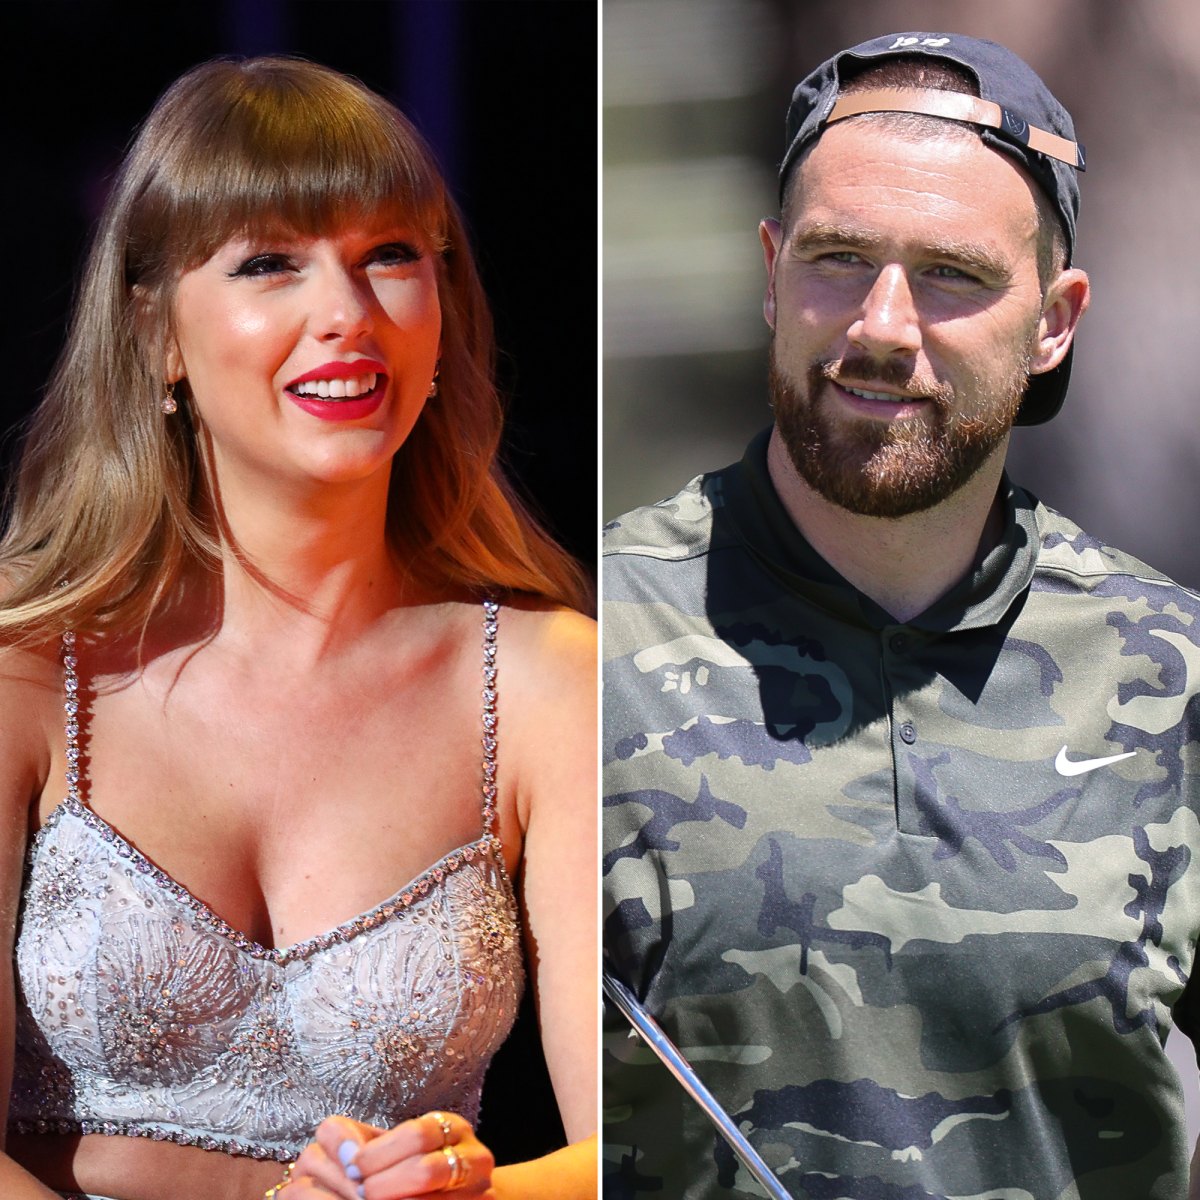 Travis Kelce Tried Giving Taylor Swift His Phone Number